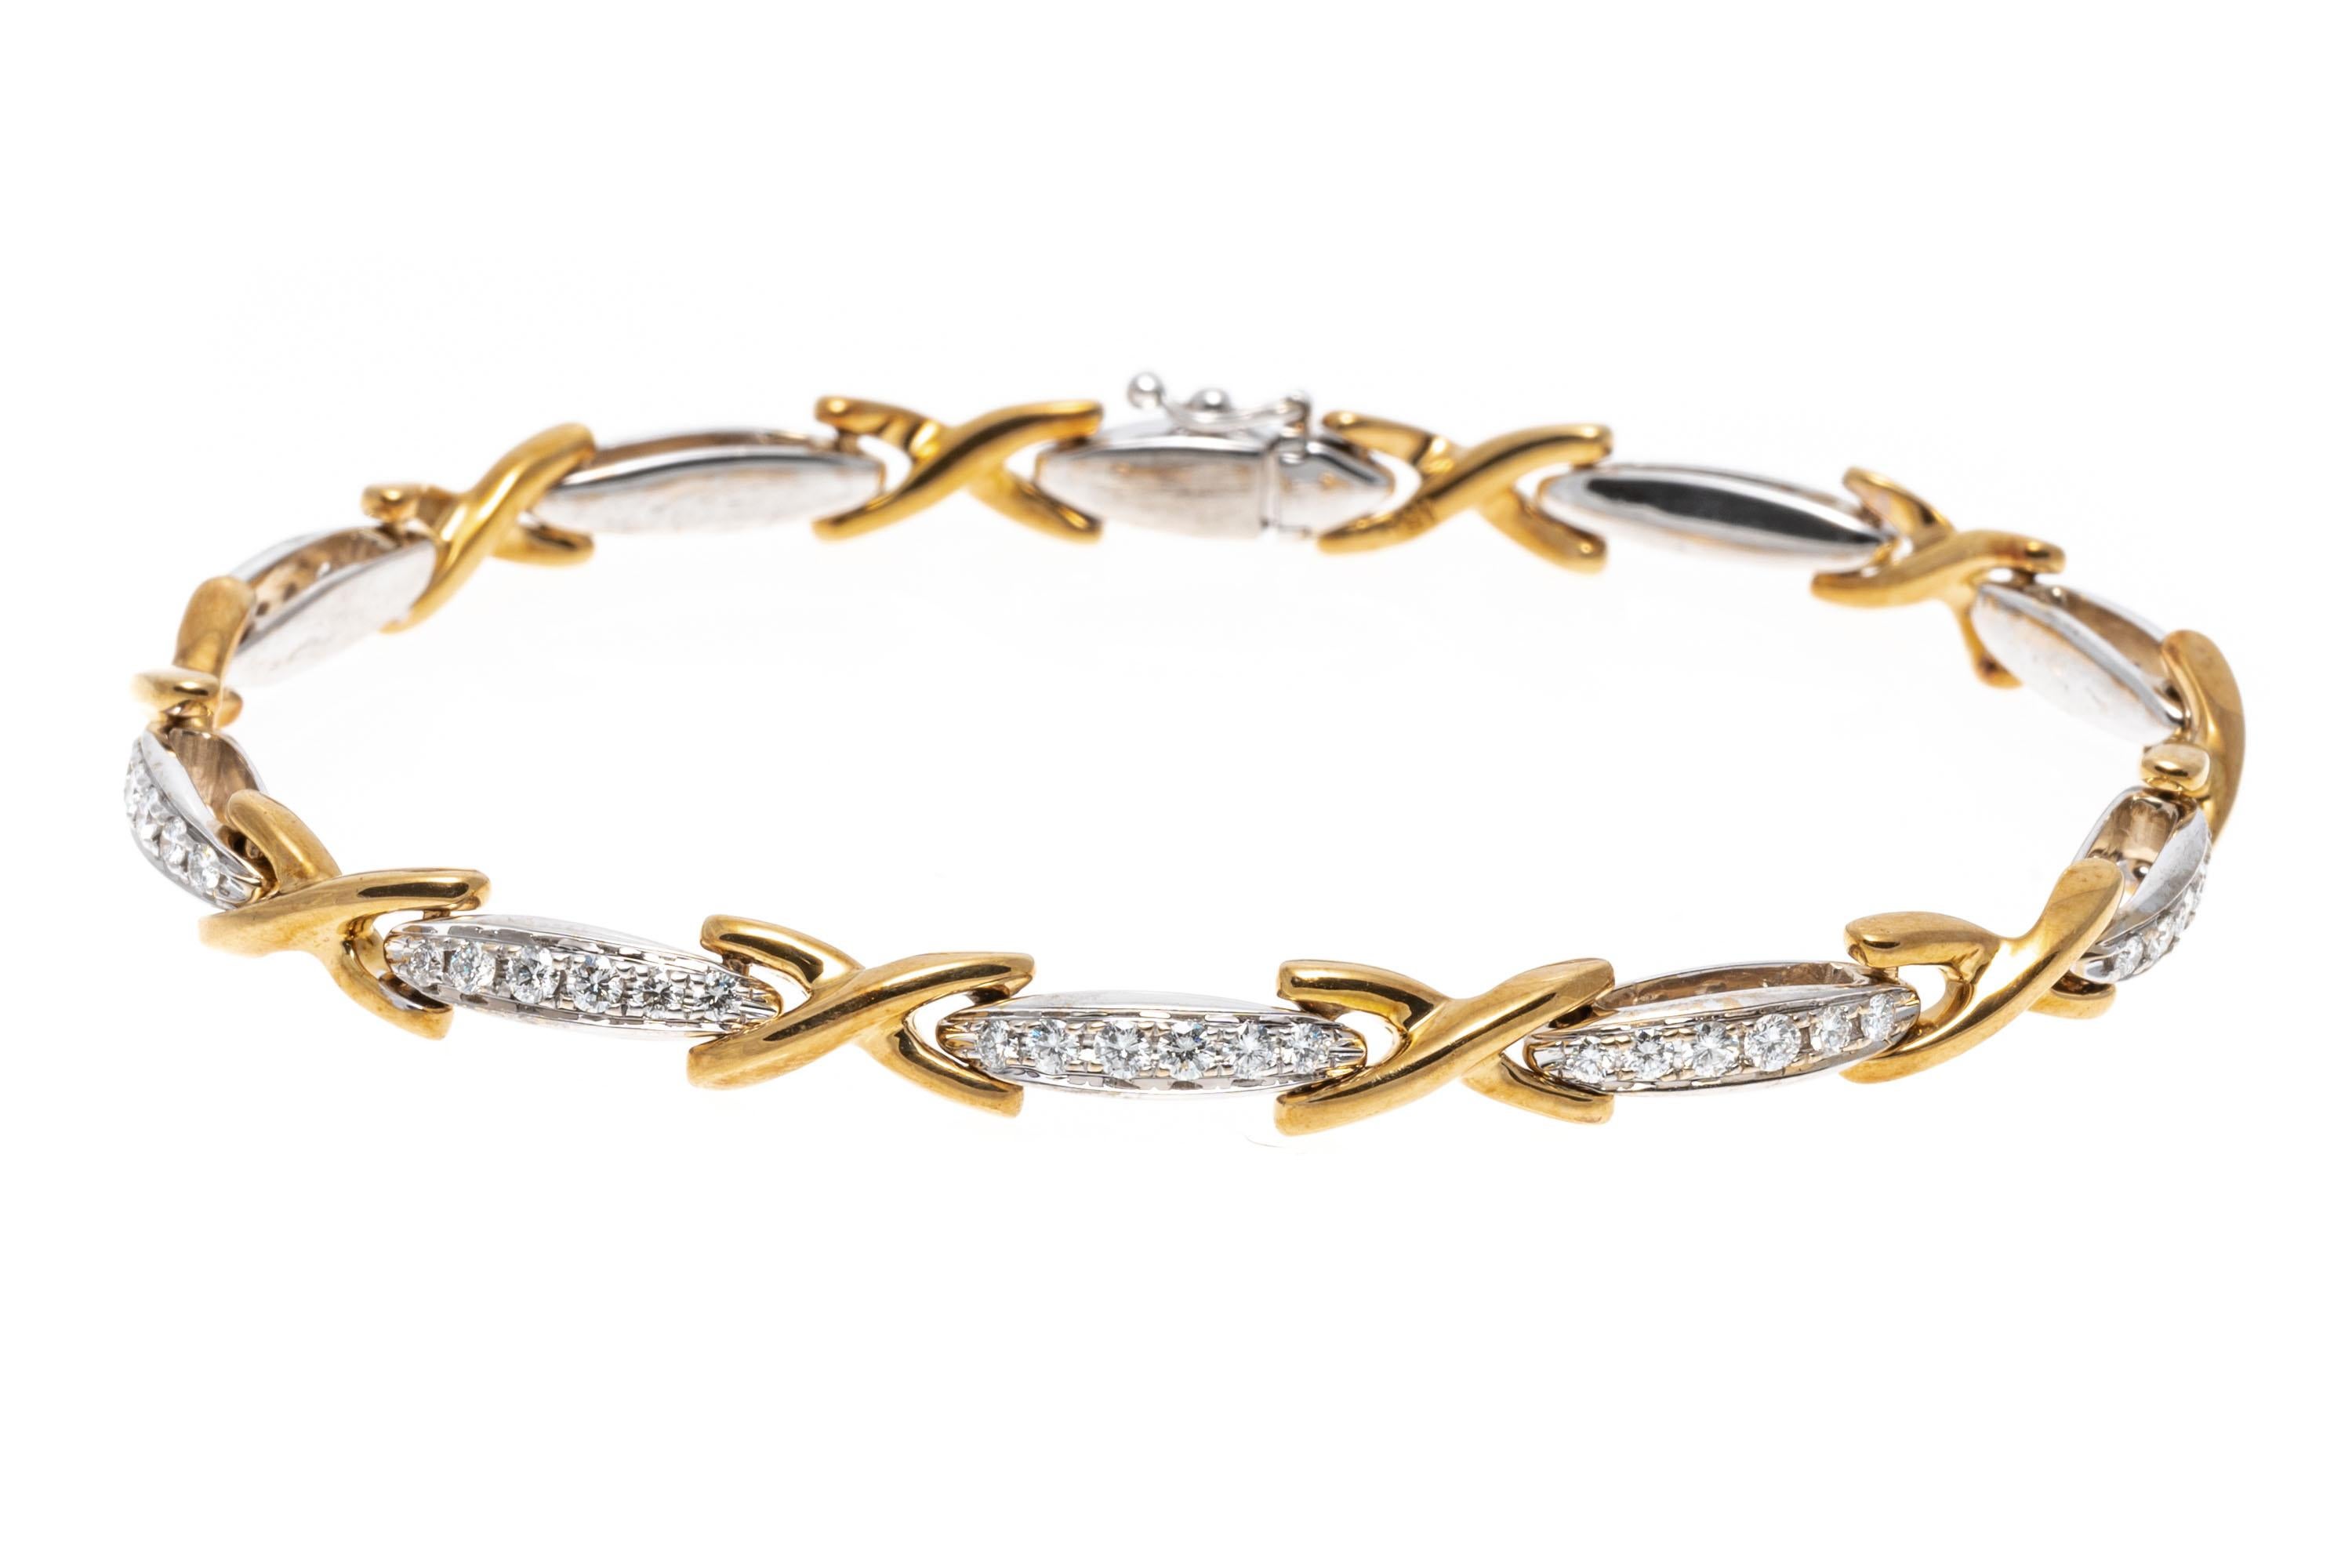 This brilliant line bracelet is crafted from 18K yellow and white gold. The alternating links of this bracelet display yellow gold crosses and white gold bars. The white gold bar links are set with brilliant cut diamonds creating a dazzling shine.